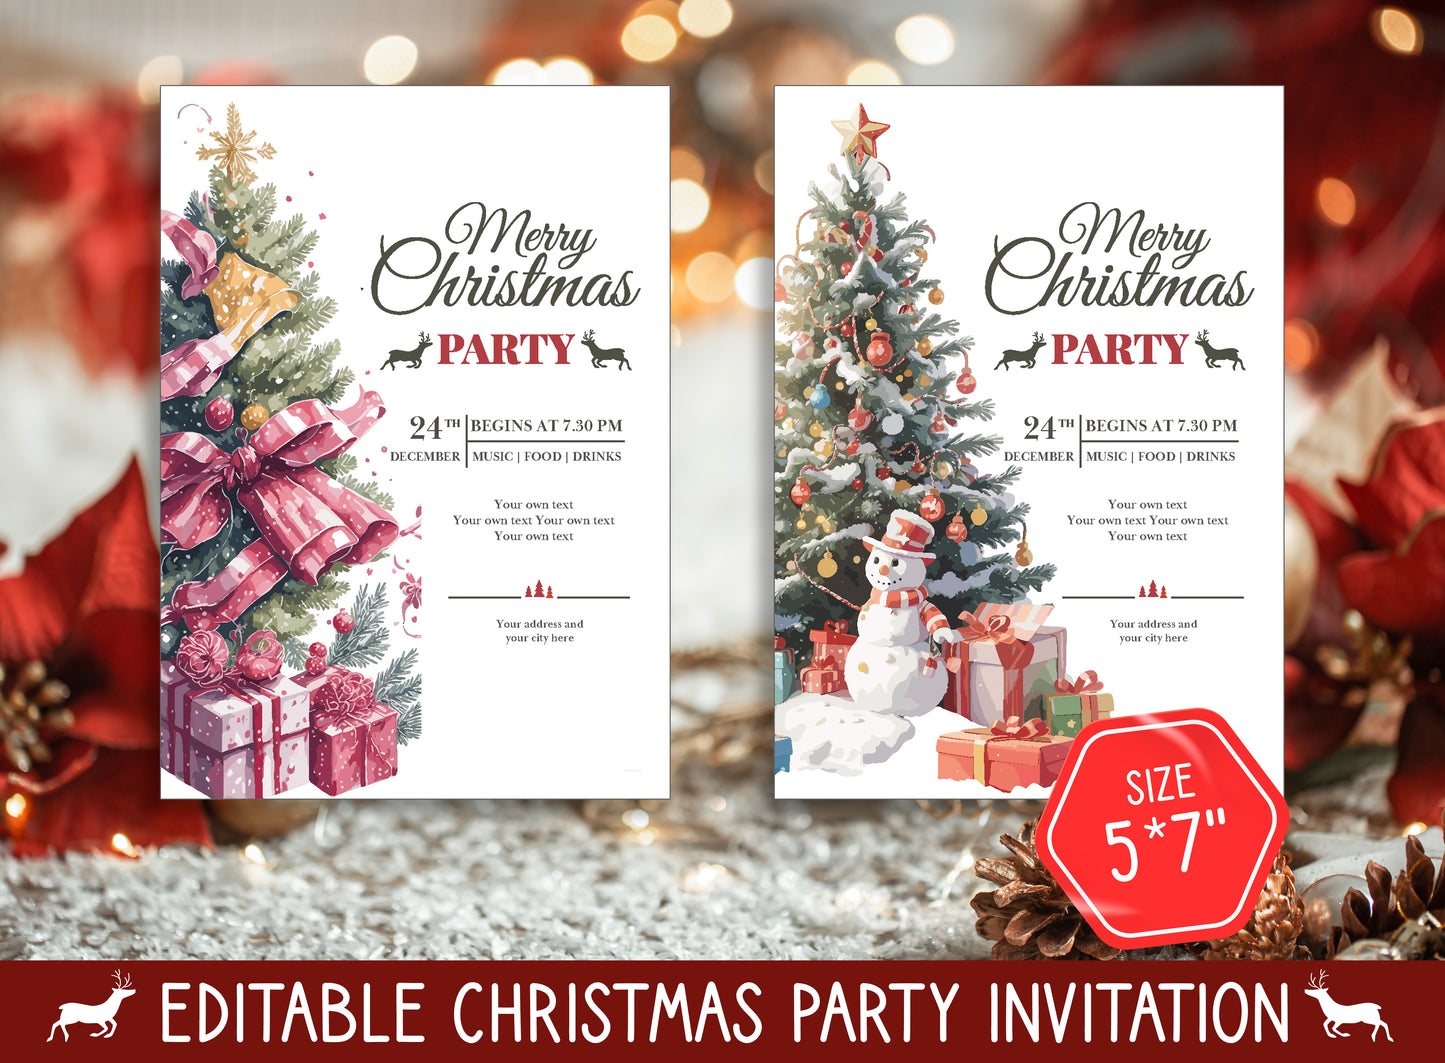 Editable Holiday Party Invitation, Choose from 2 Designs & 2 Sizes (8.5"x11" and 5"x7"), PDF File, Instant Download